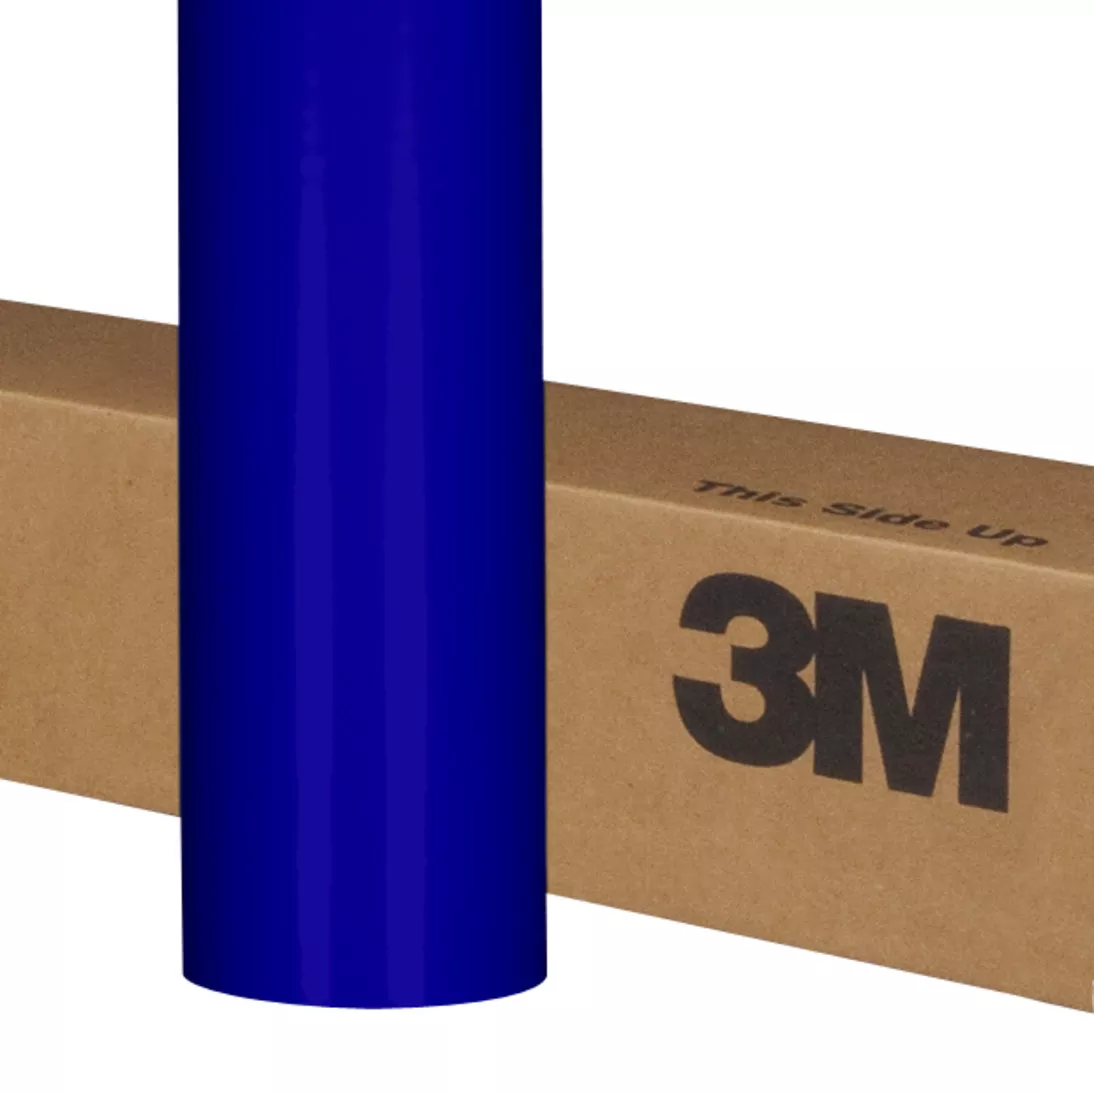 3M™ Controltac™ Graphic Film with Comply™ Adhesive 180mC-17, Vivid Blue,
36 in x 50 yd, 1 Roll/Case